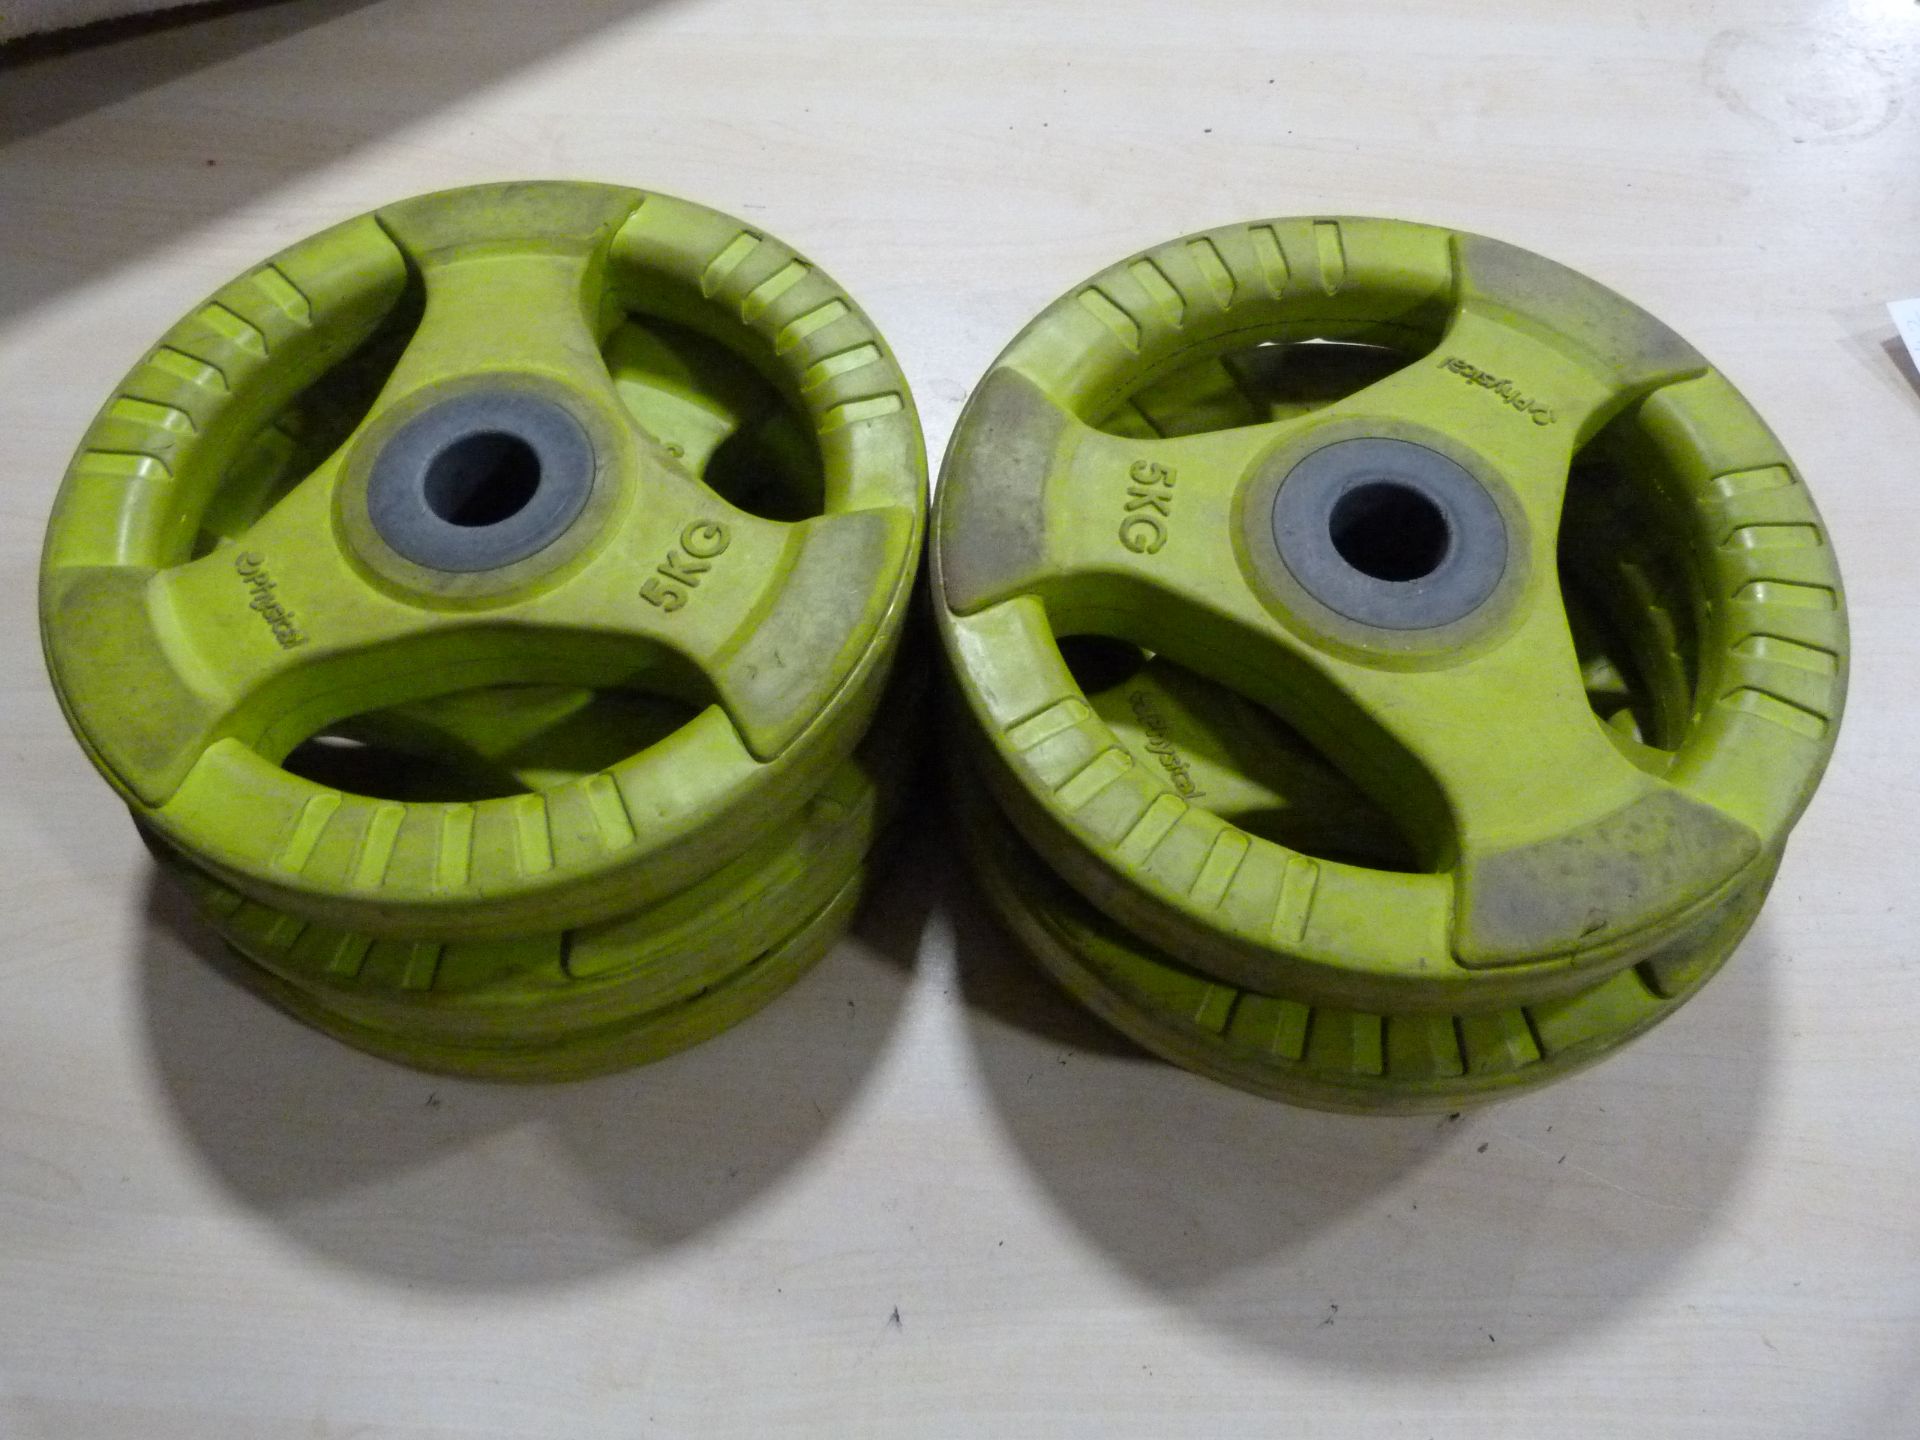 *Six Physical 5kg Weight Discs (green)